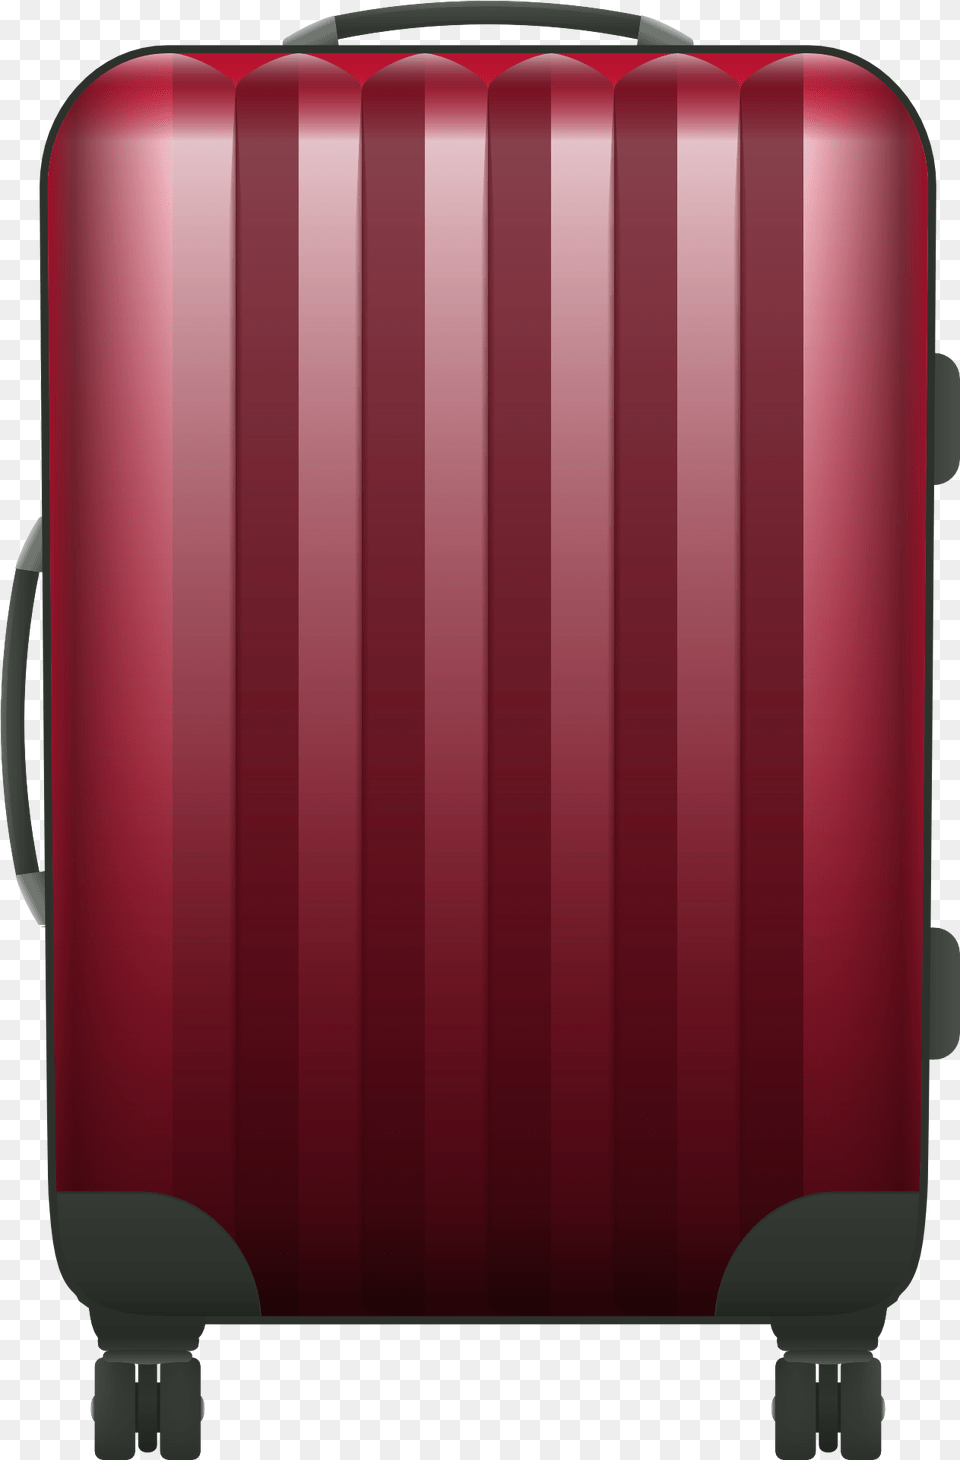 Travel Bag Vector Transparent Image Travel Bags Vector, Baggage, Suitcase, Dynamite, Weapon Png